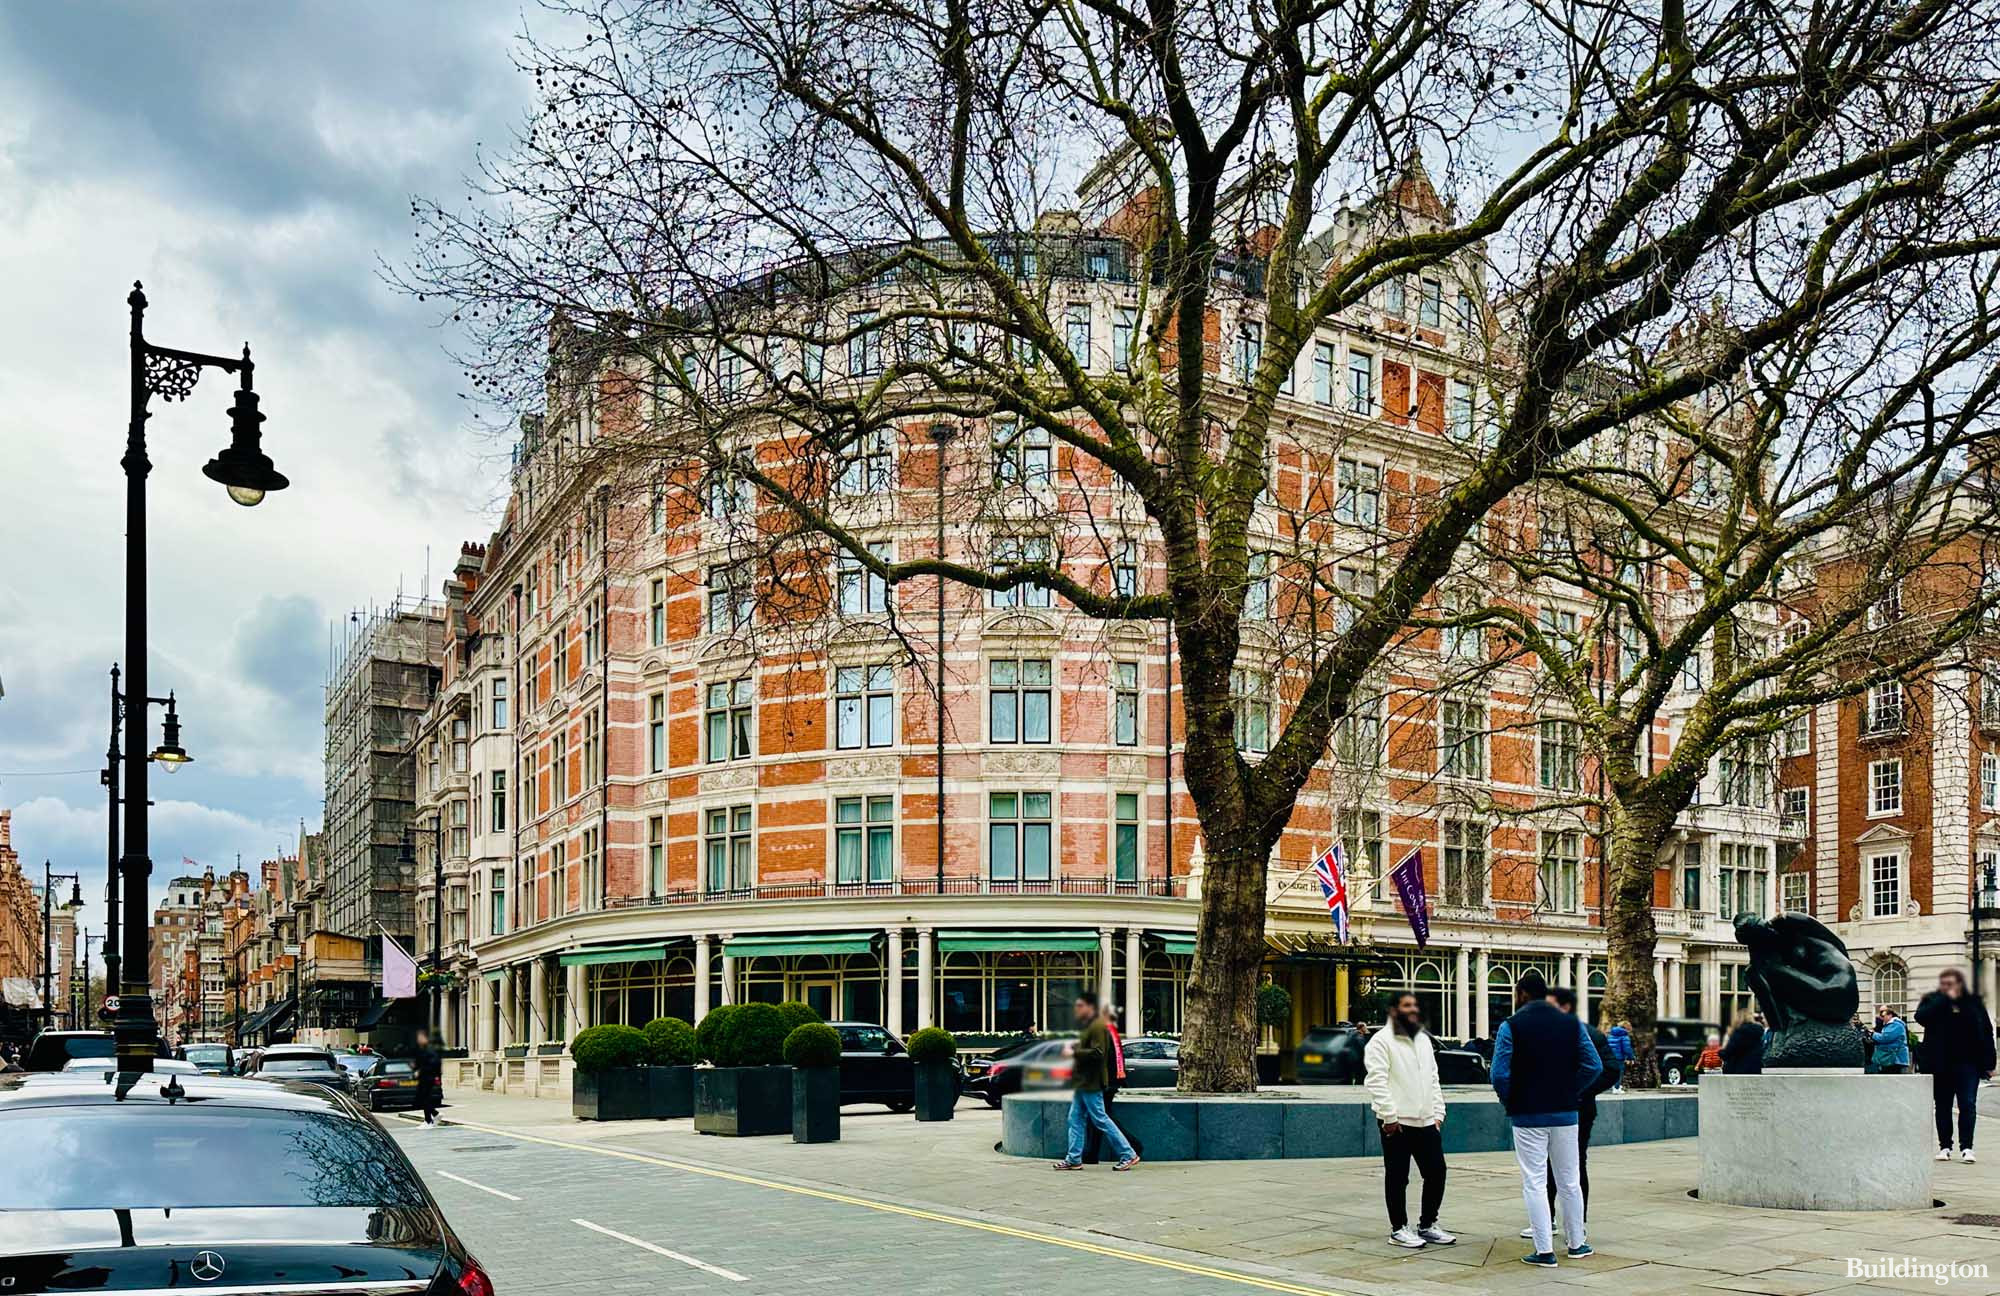 The Connaught hotel in Mayfair, London W1.